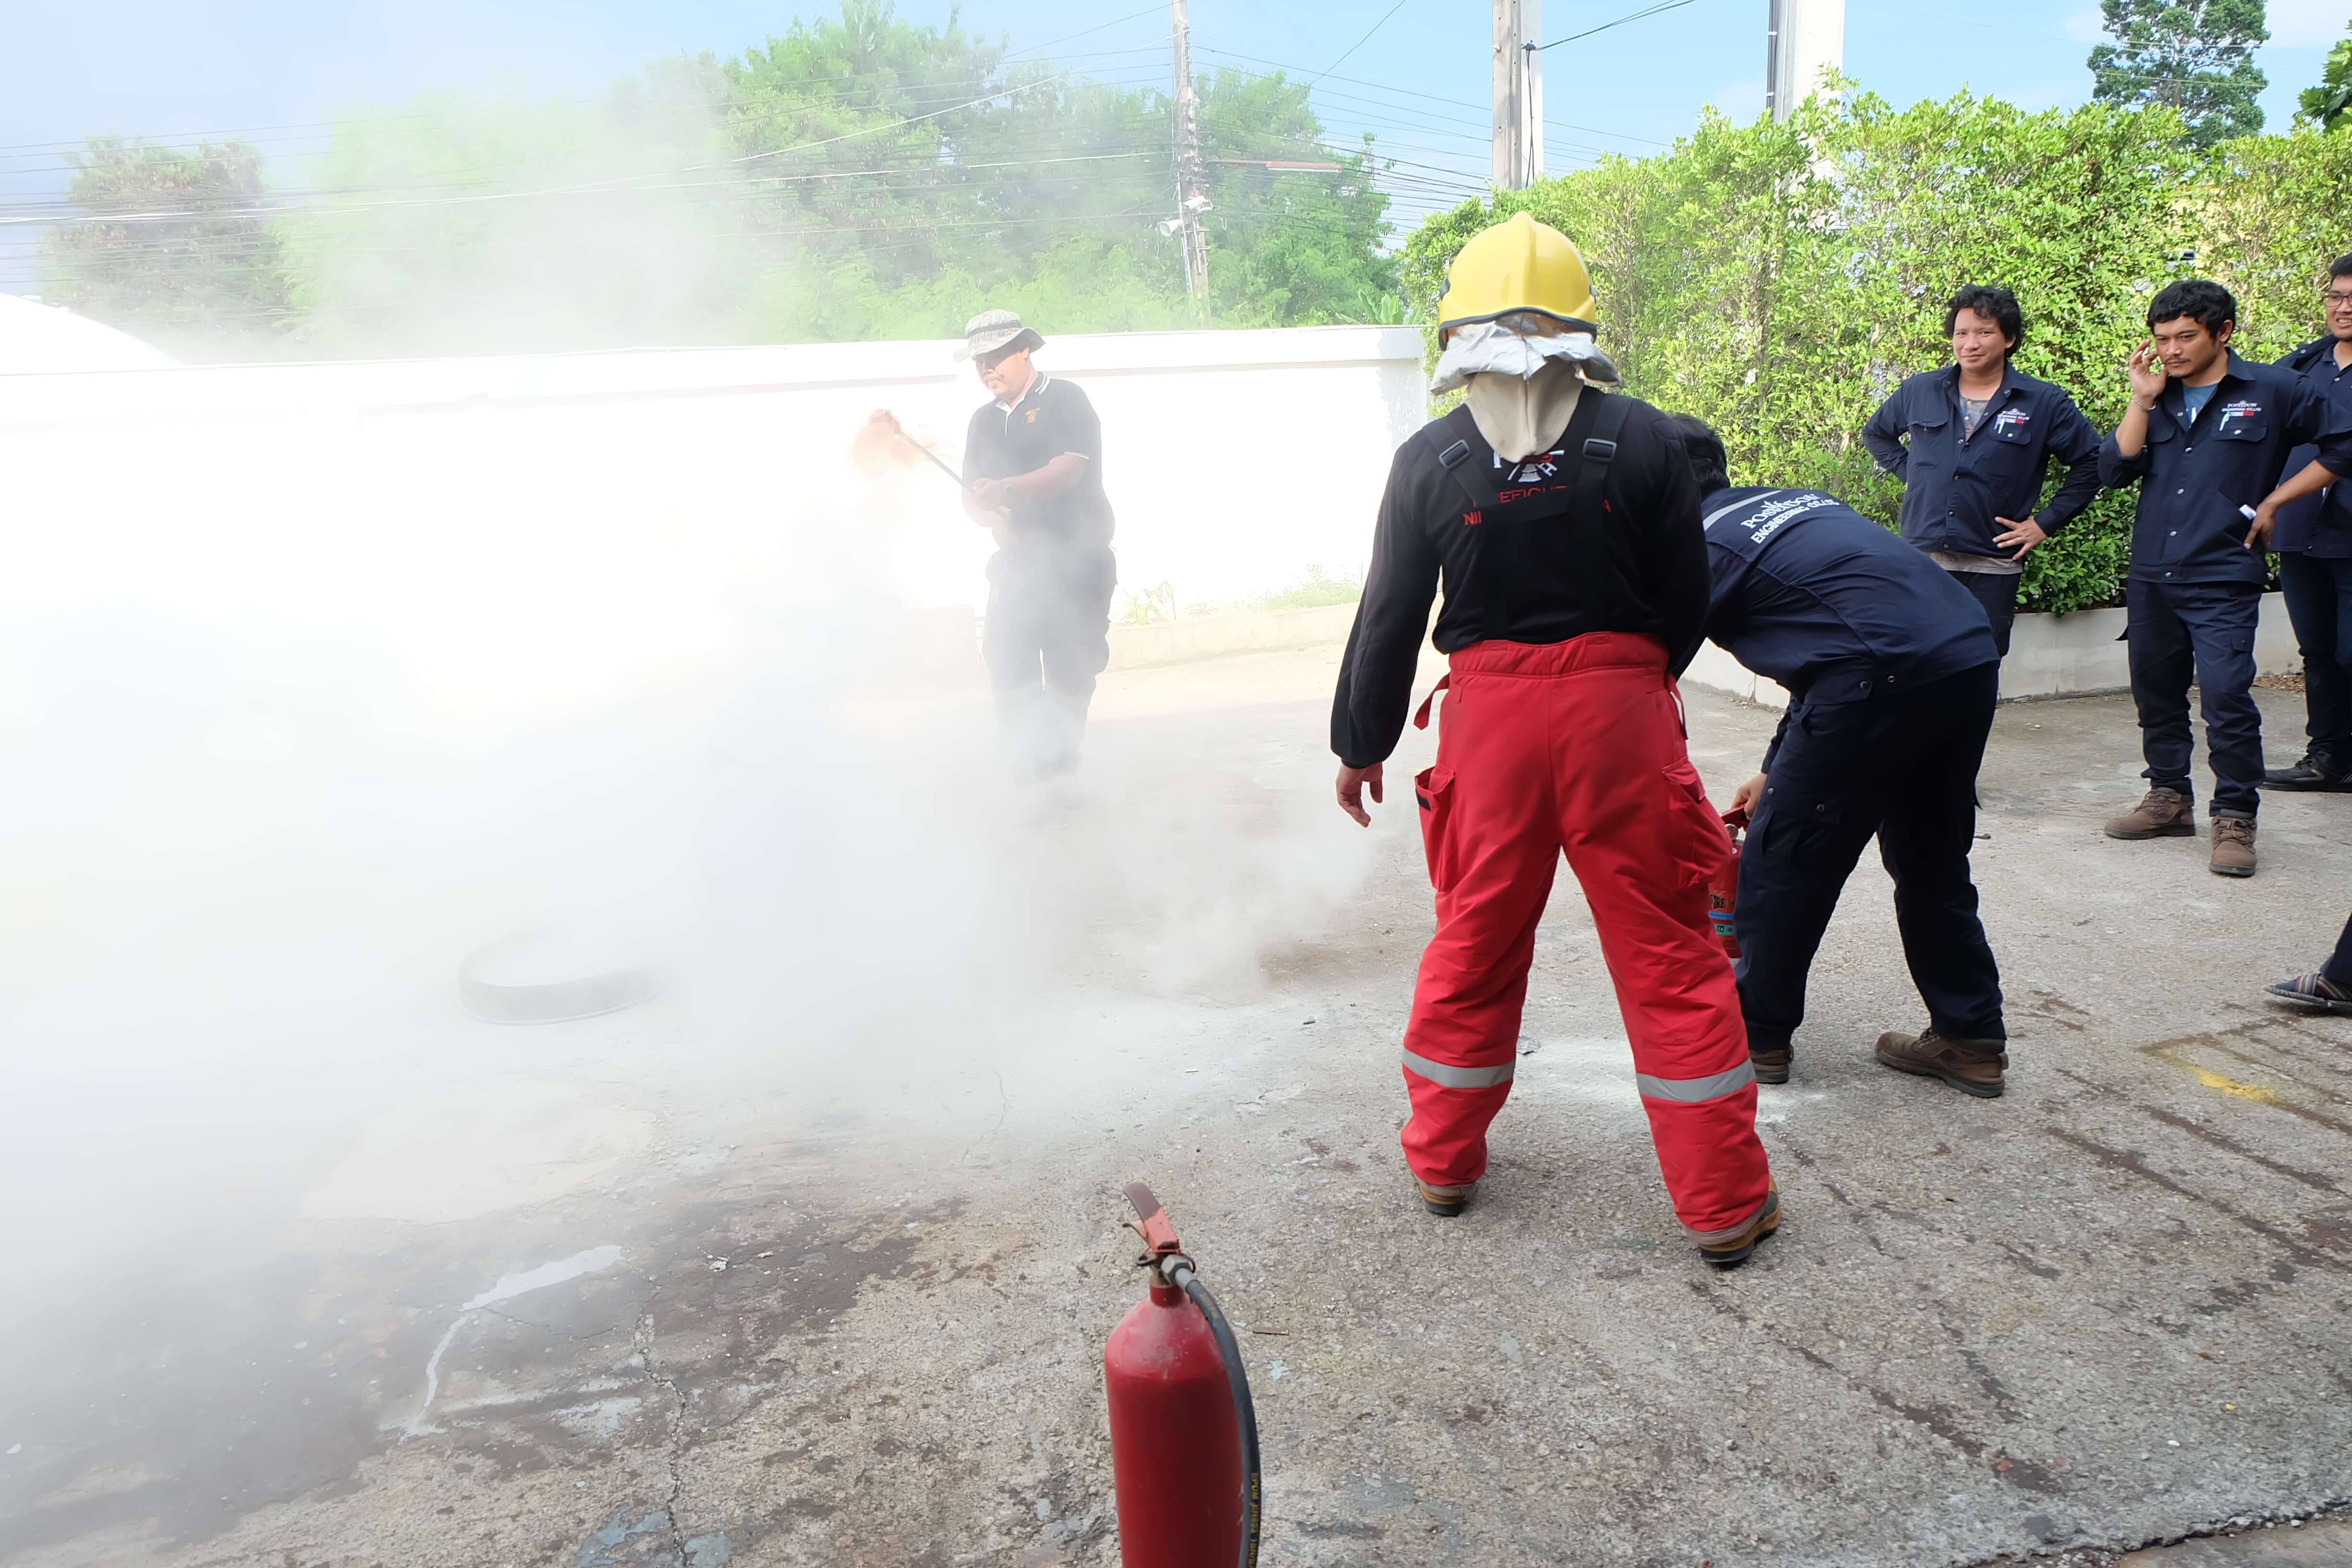 Firefight and Fire Escape Training